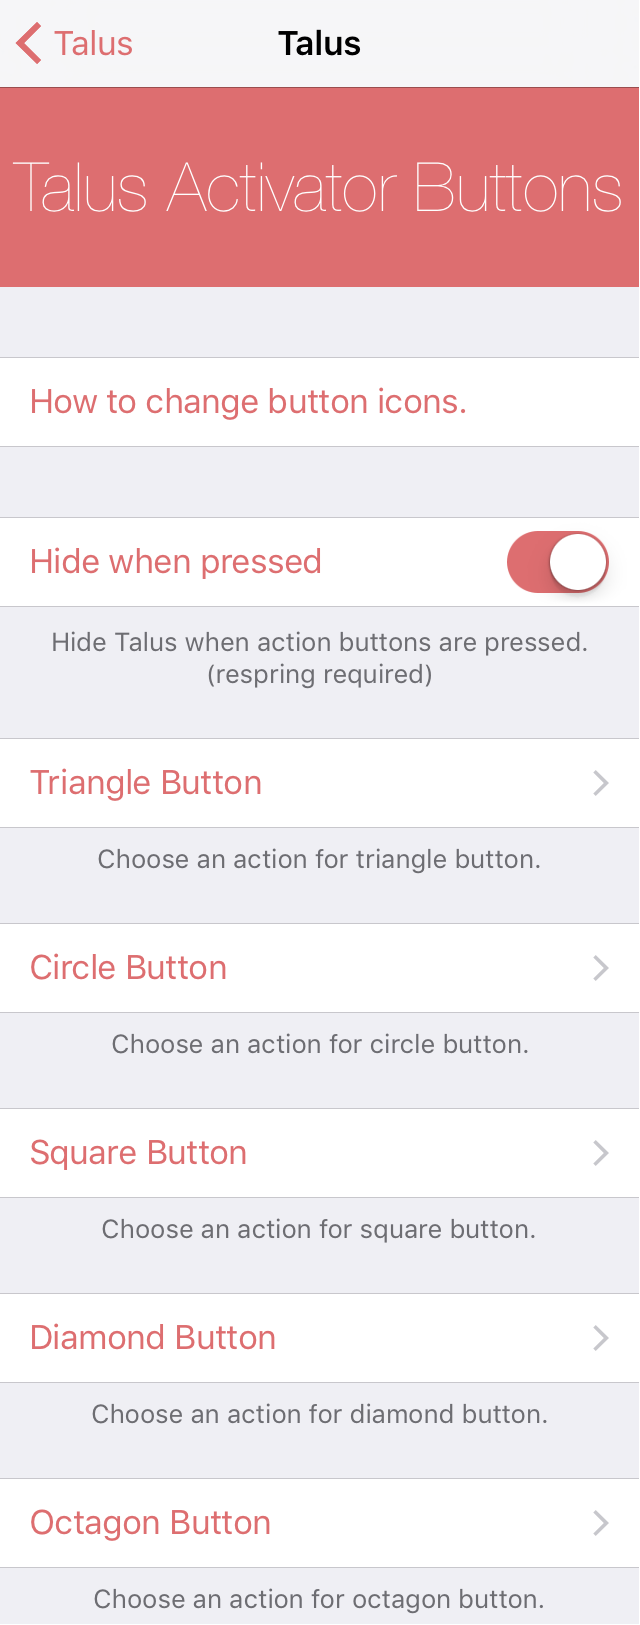 Talus Activator Actions Preferences